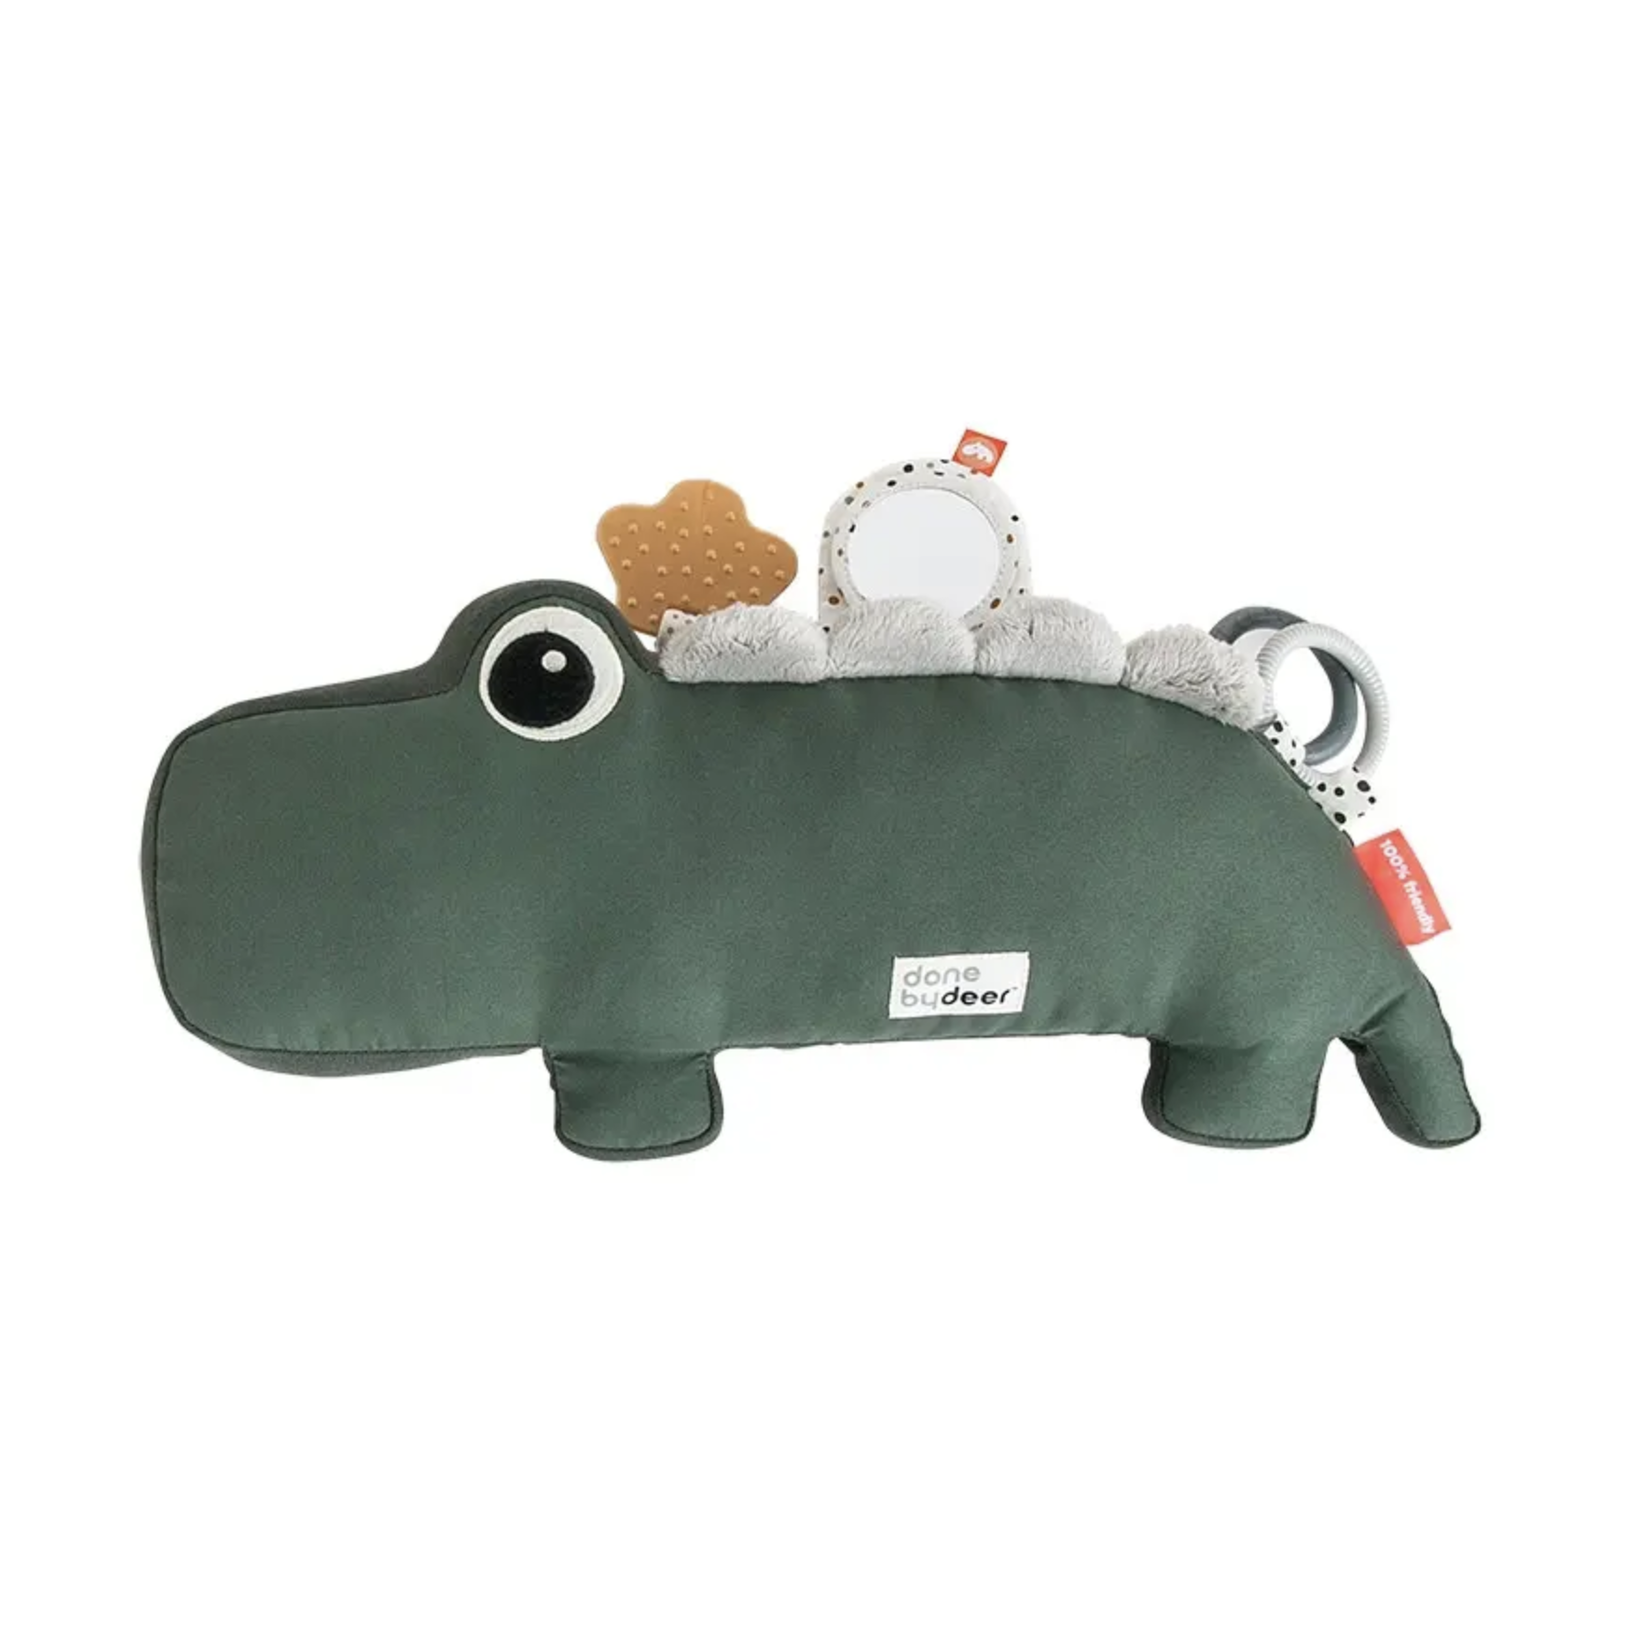 Done by Deer Tummy Time Activity Toy Croco green (41 x 18 x 10cm)